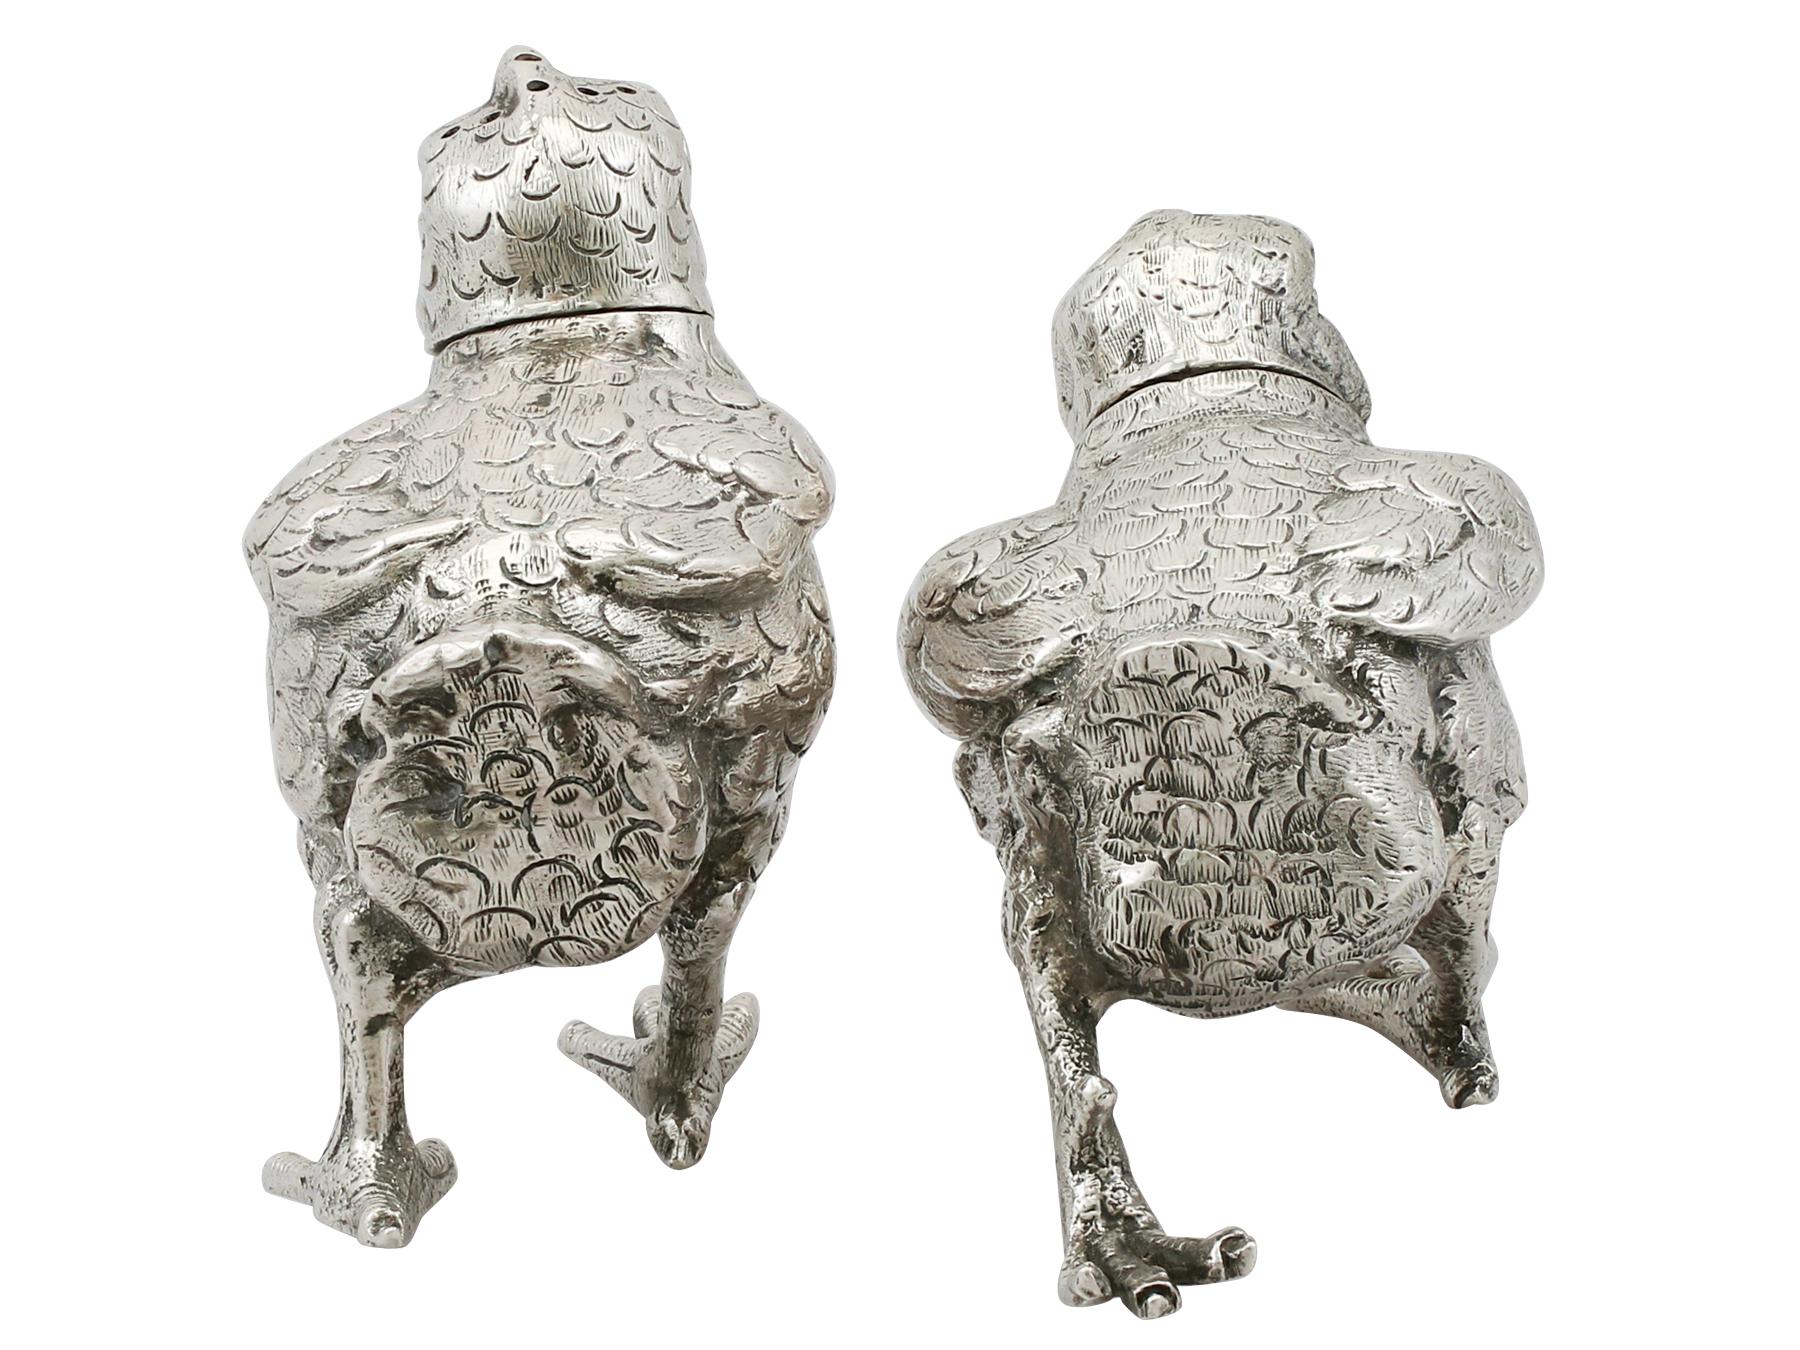 An exceptional, fine and impressive pair of antique George V English cast sterling silver pepper shakers modeled in the form of chicks; an addition to our silver cruets or condiments collection

These exceptional antique George V cast sterling